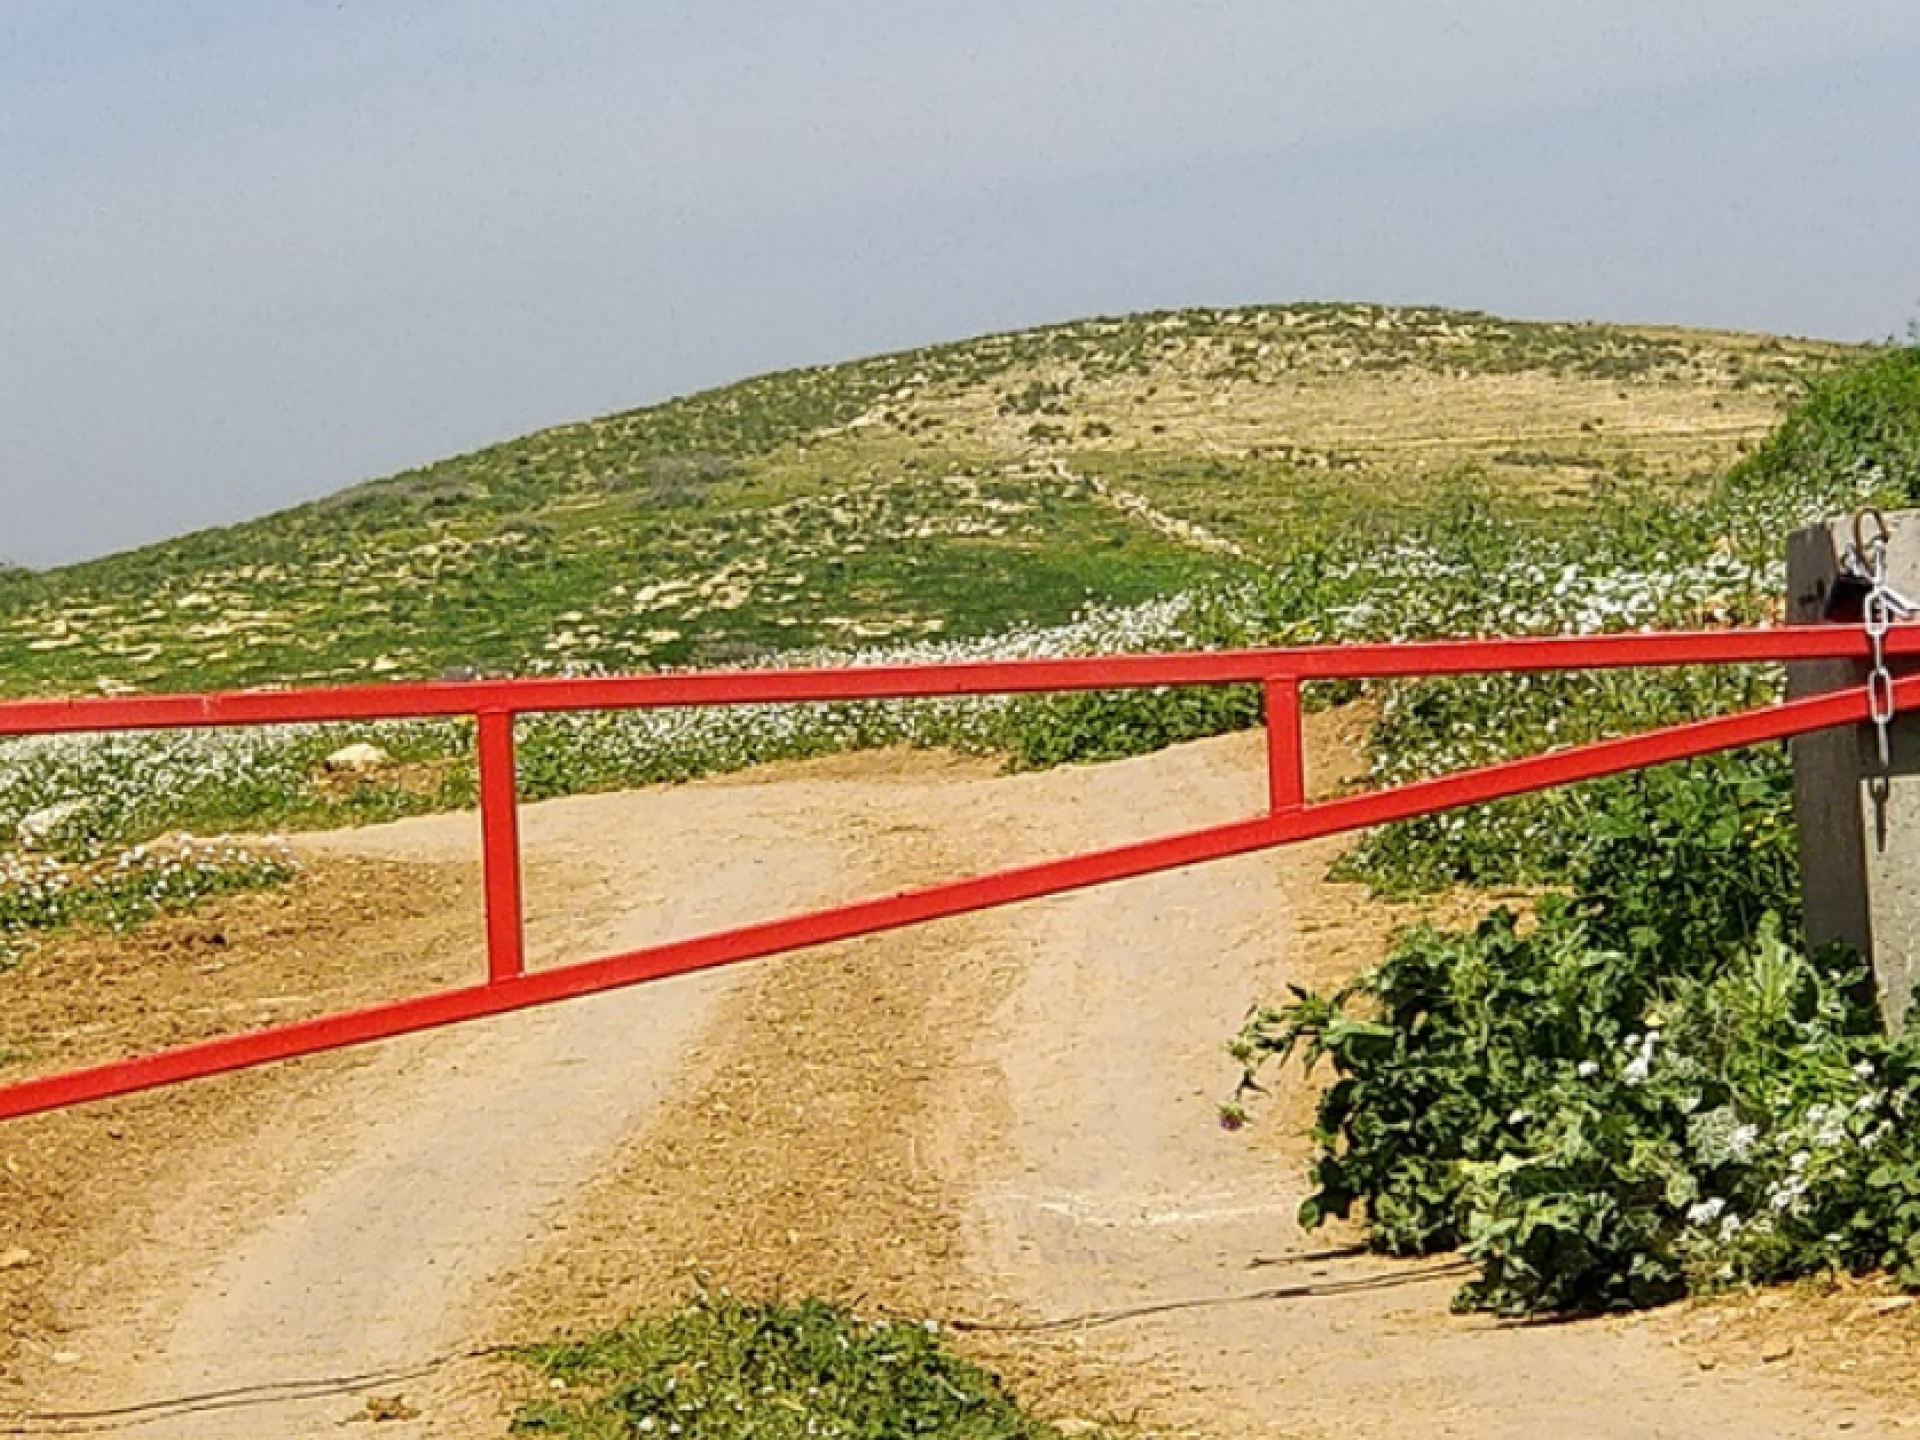 Palestinian Jordan Valley: the renewed Gokhia Gate blocks passage between the western and eastern parts of the West Bank